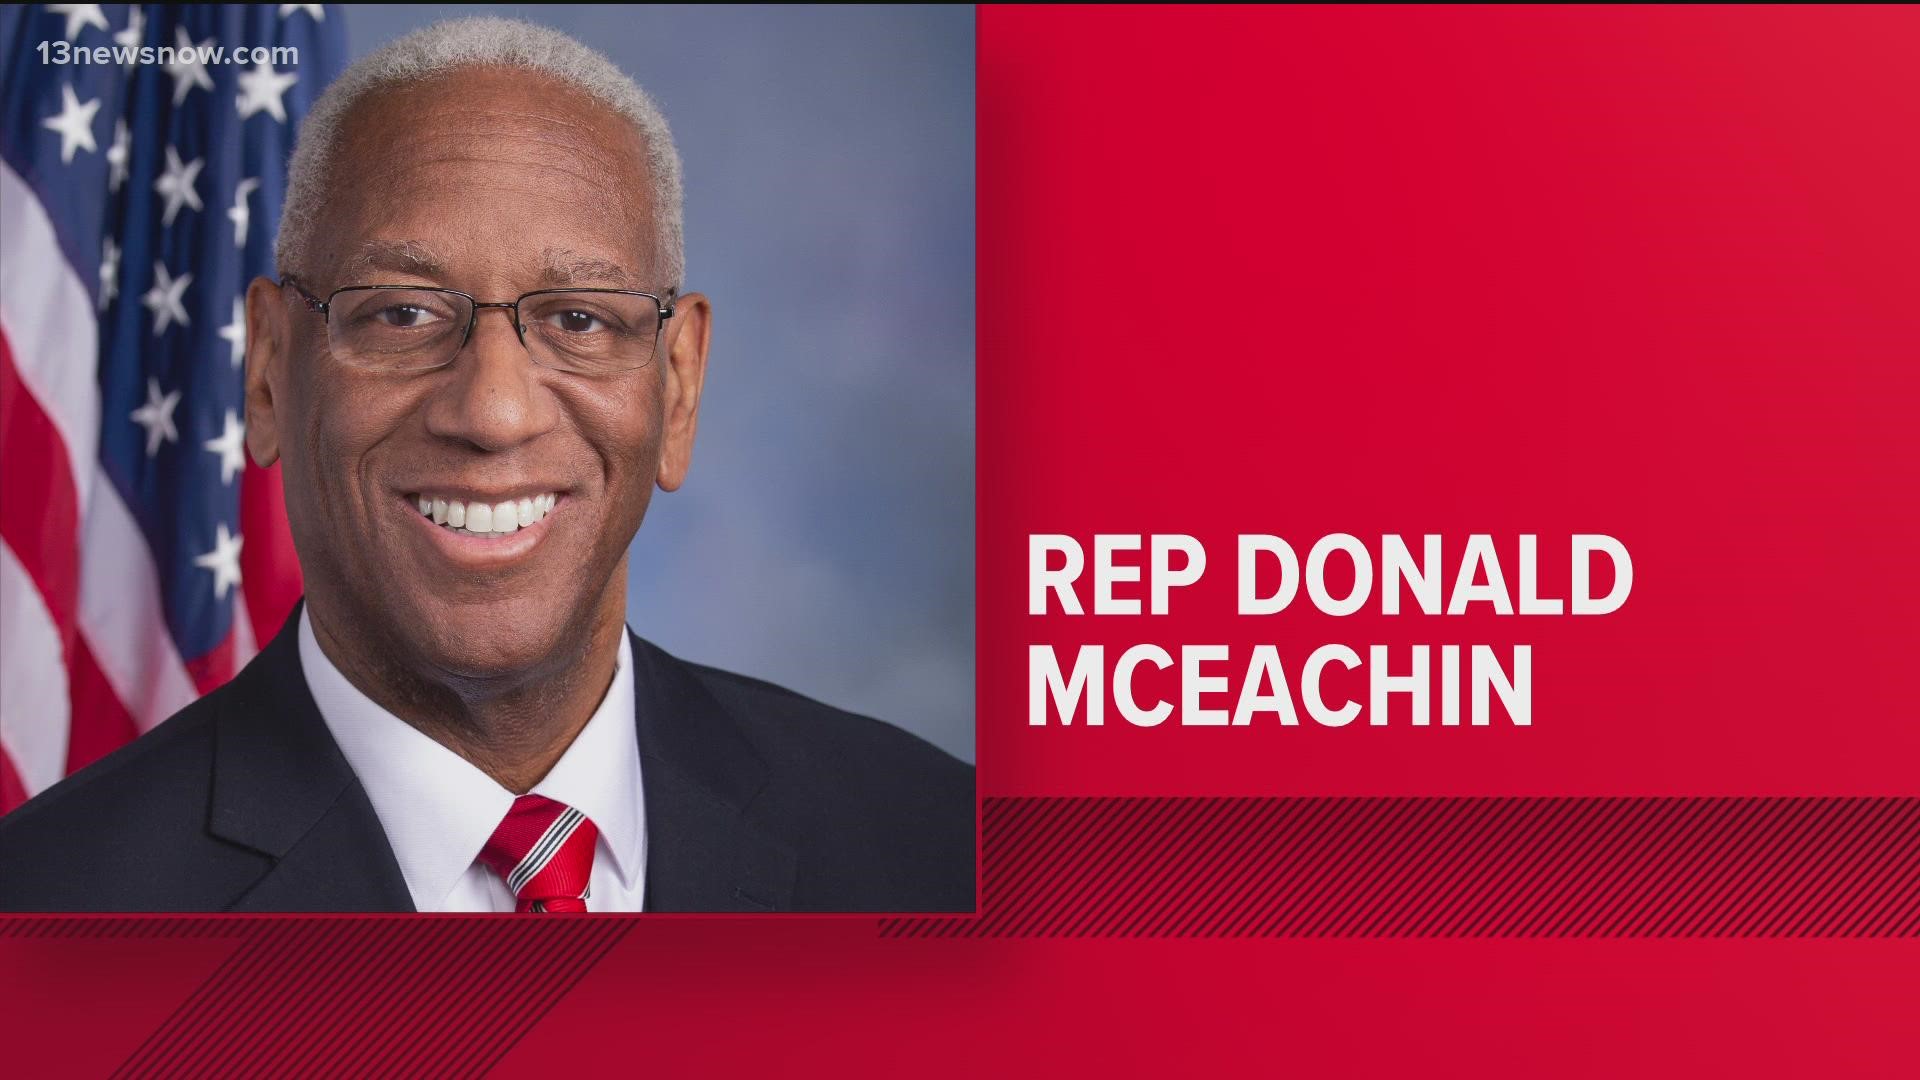 McEachin had been battling cancer since 2013. He's represented District 4 since 2017, but he worked in both the Virginia House of Delegates and State Senate before.